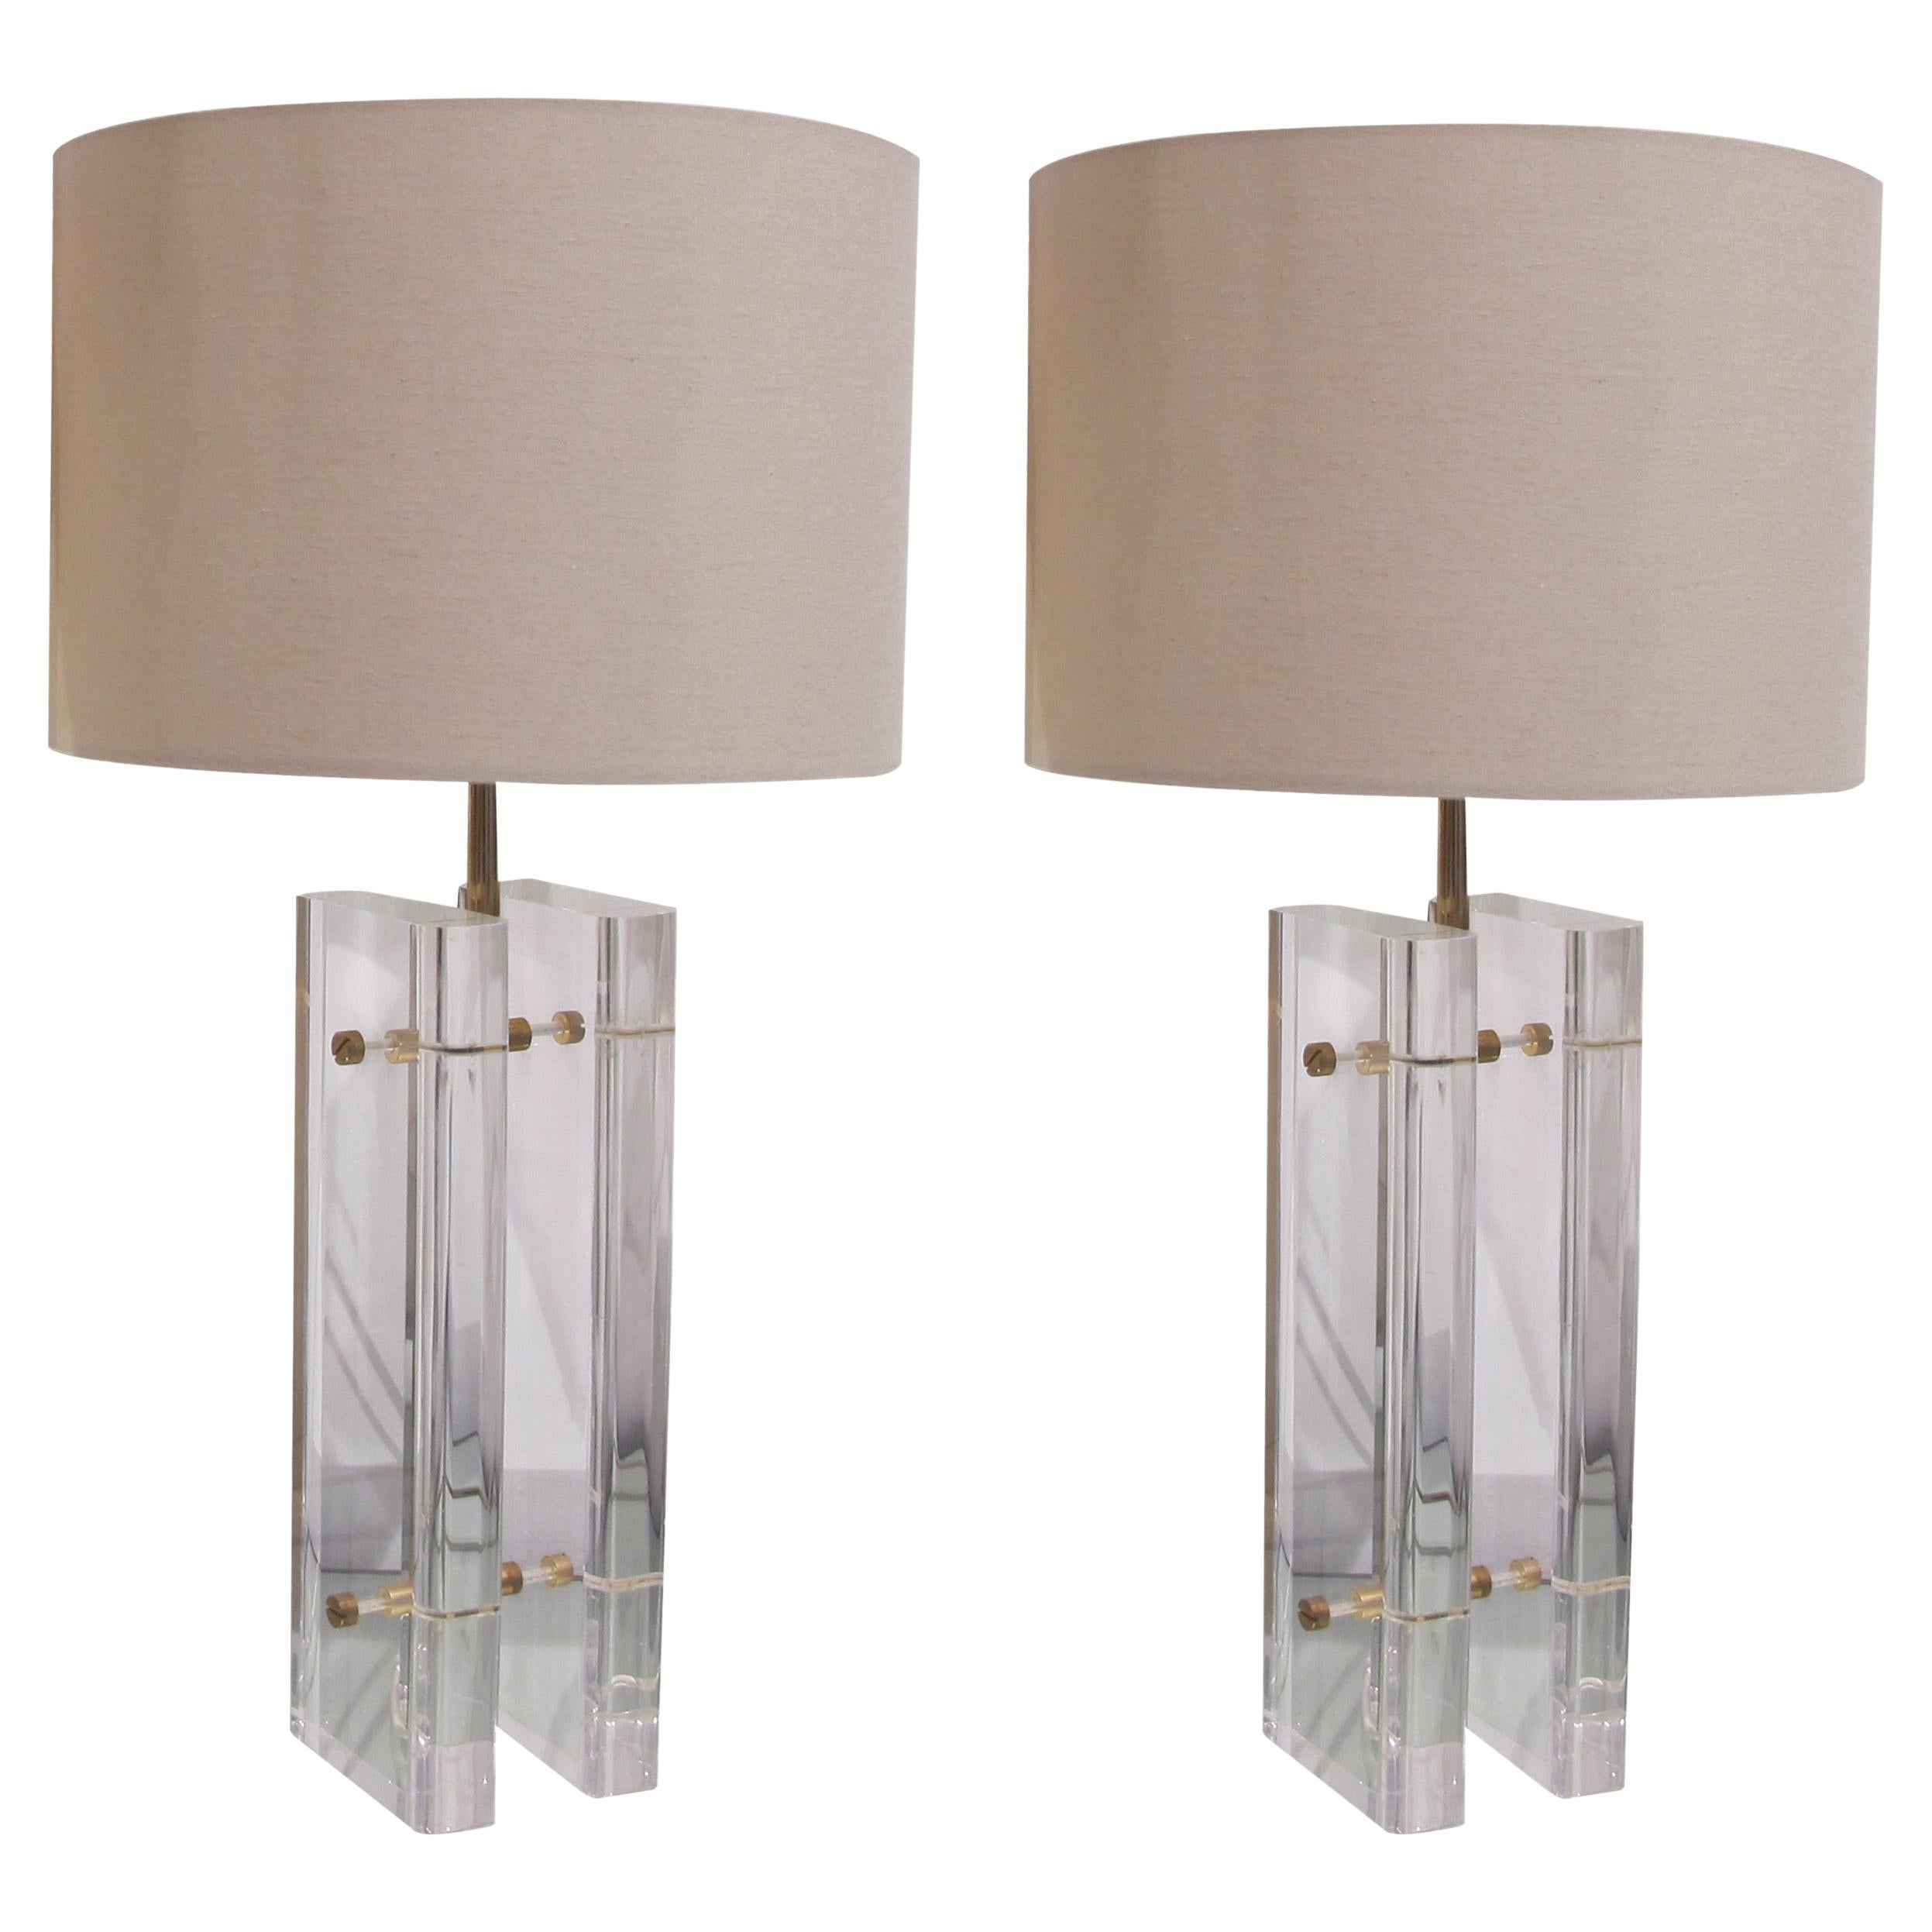 Pair of 1970s Italian Tall Rectangular Lucite & Brass Table Lamps inc Shades